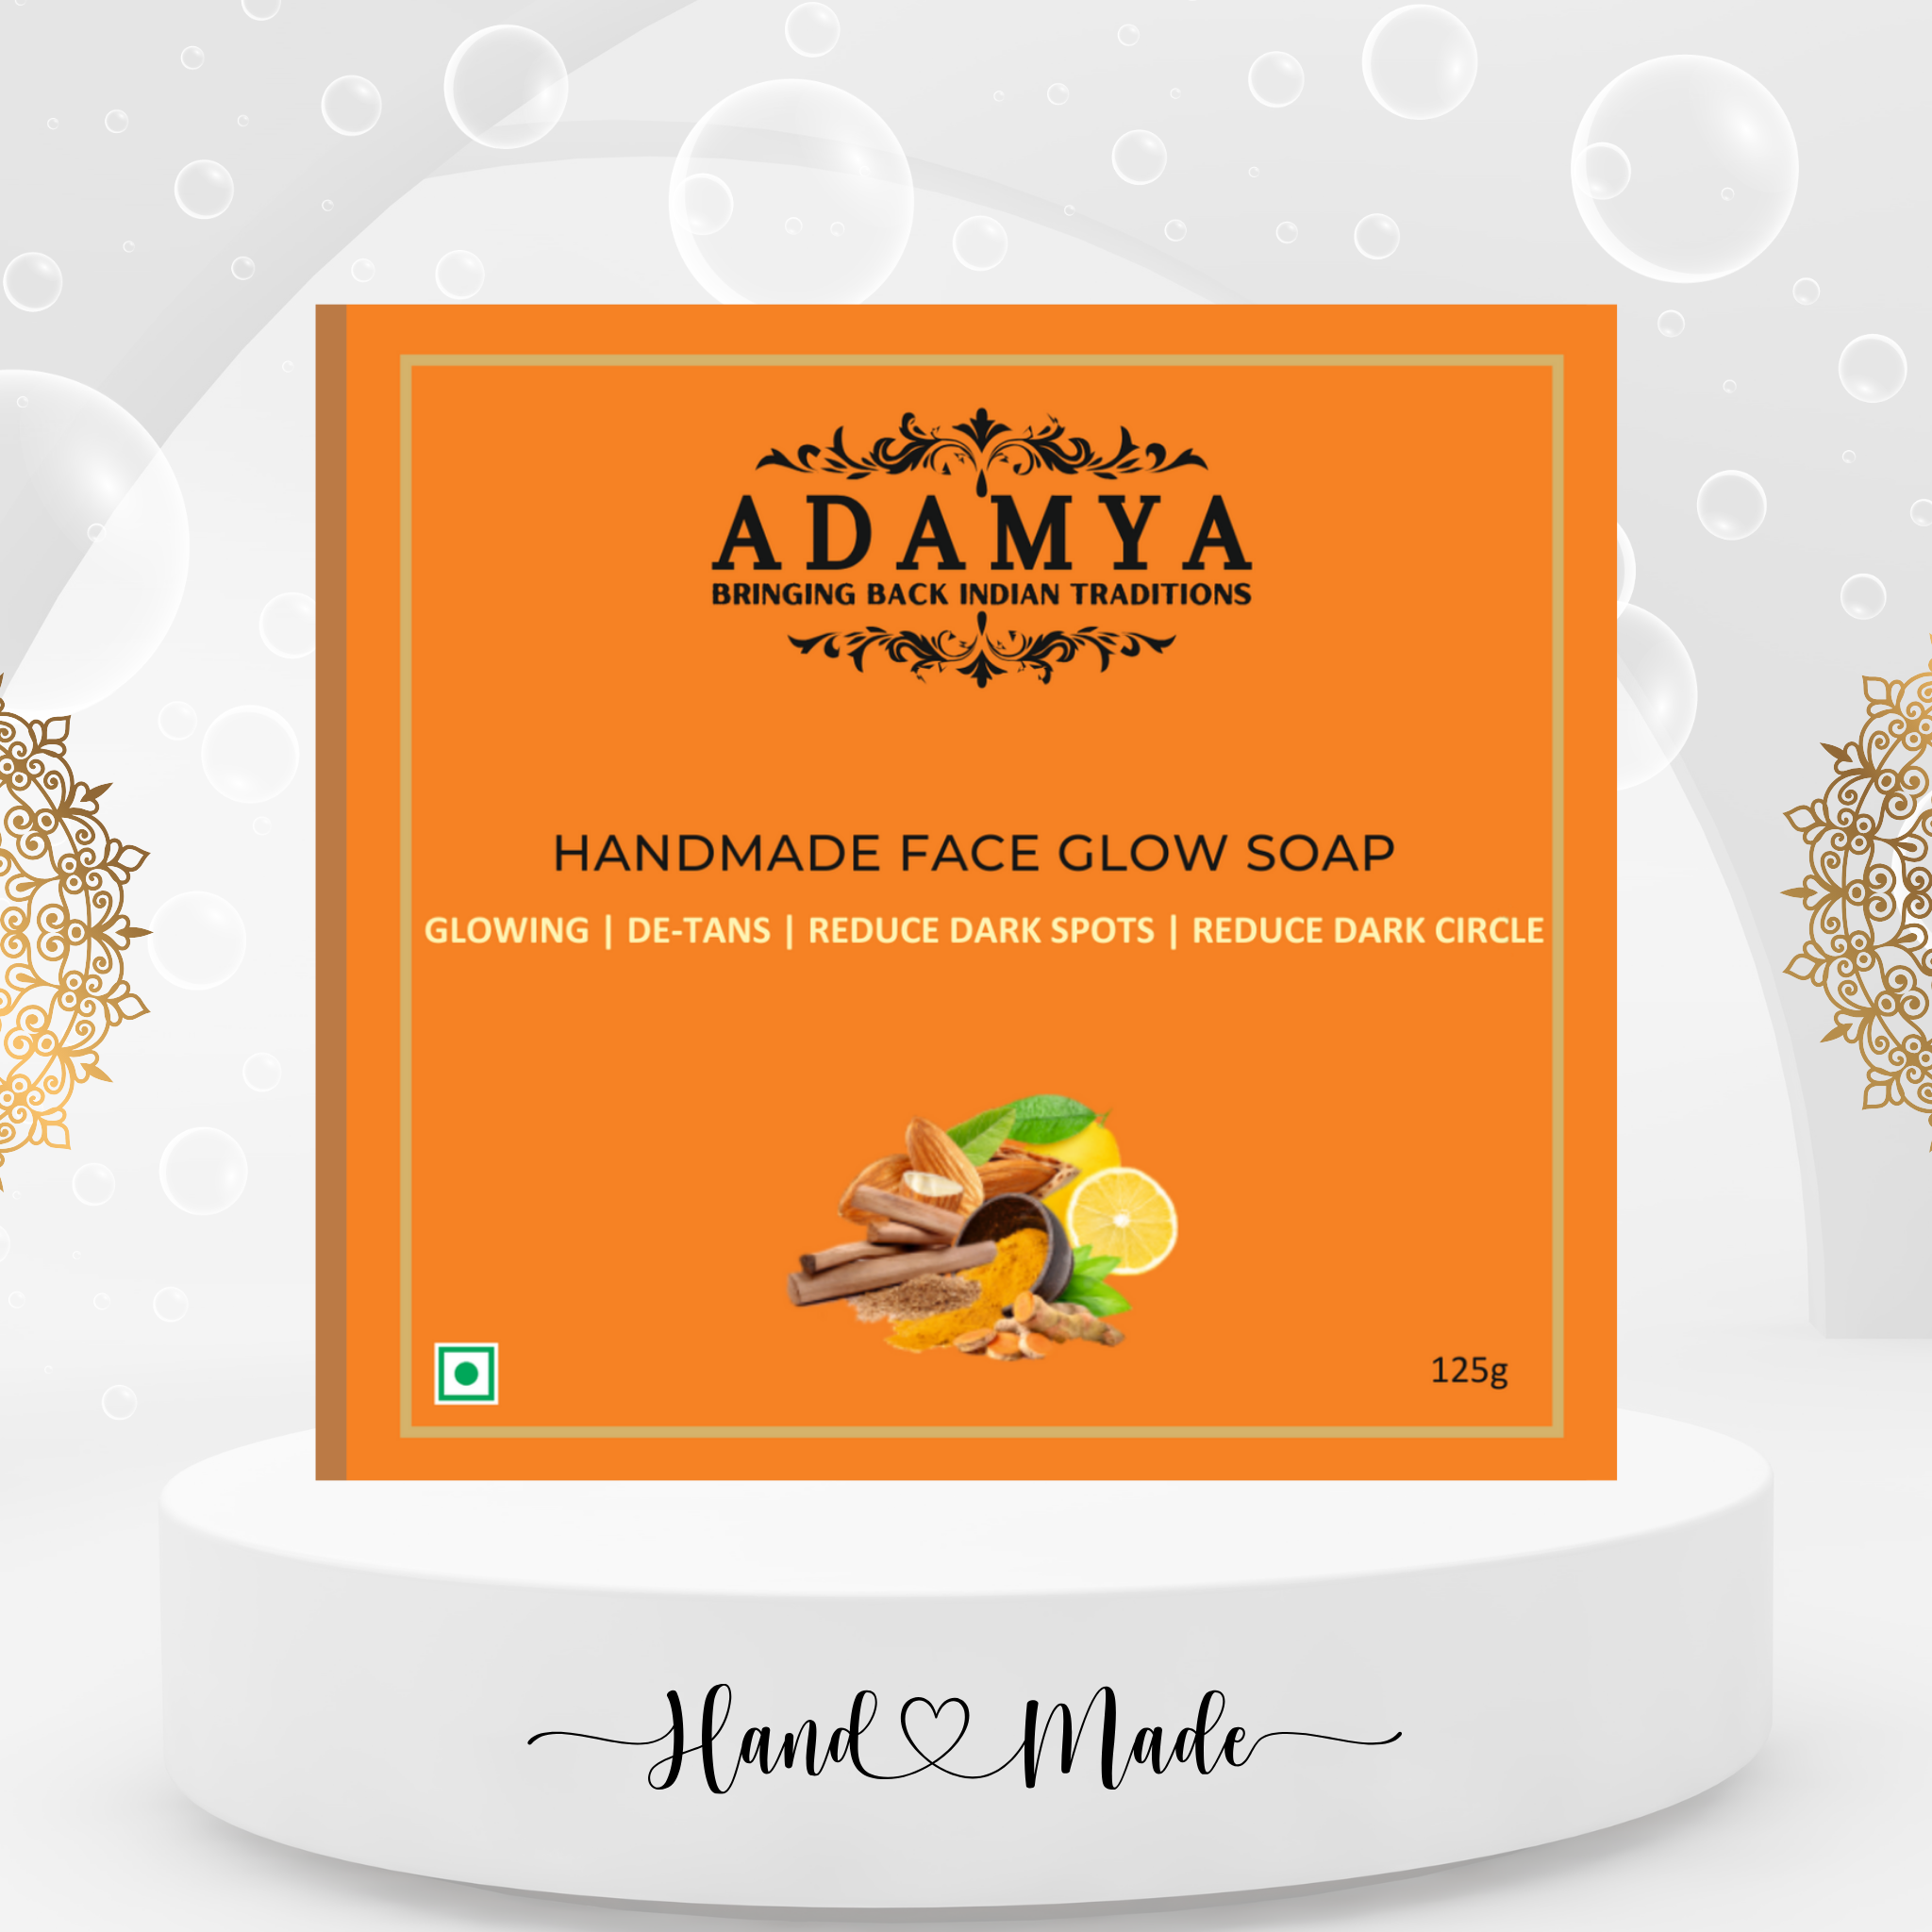 HANDMADE COLD PROCESSED FACE GLOW SOAP FOR GLOWING SKIN